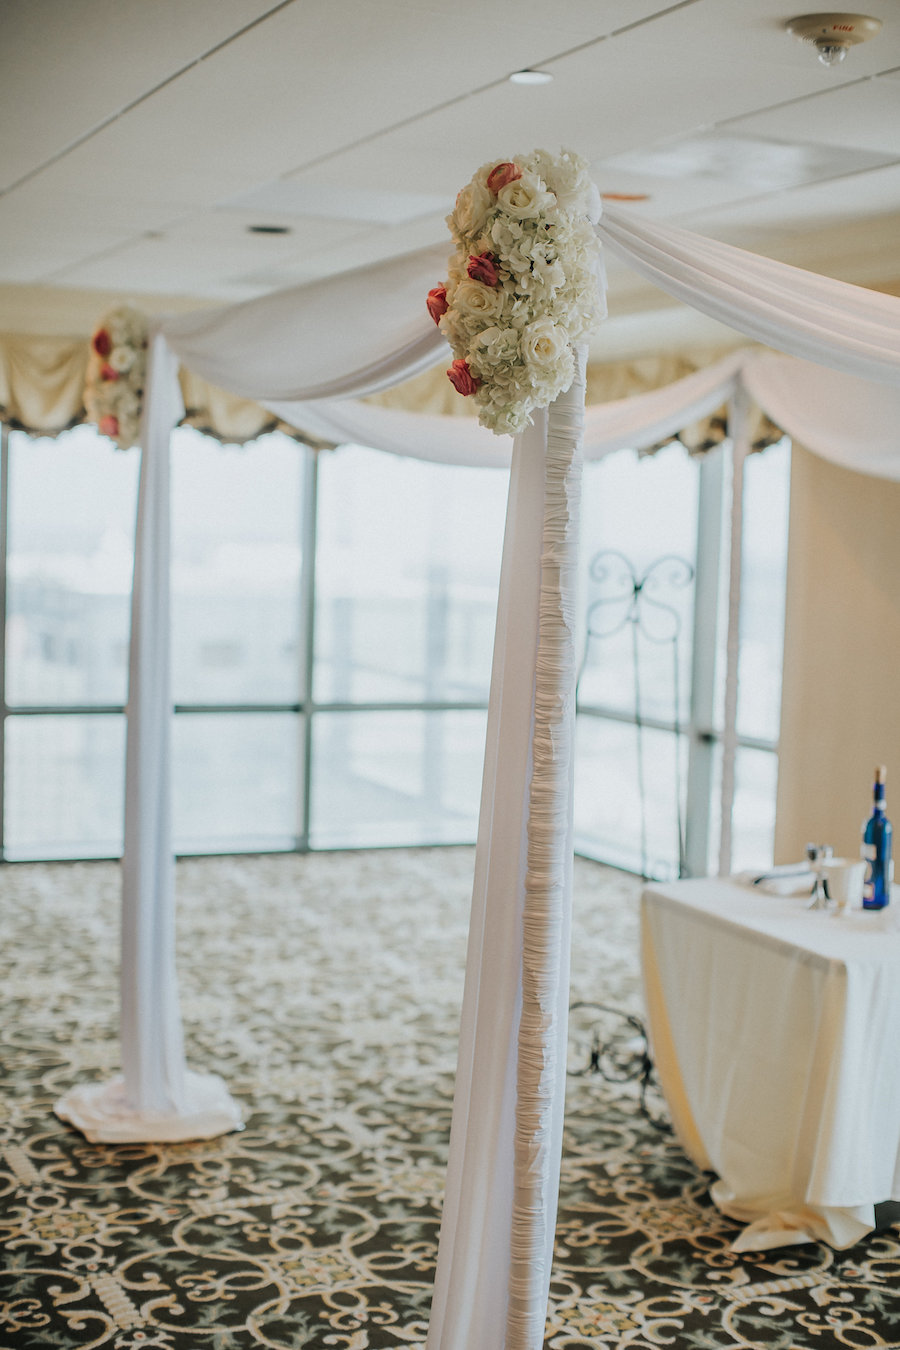 White Draped Ceremony Altar with Elegant Flowers and Decor | Downtown Tampa Wedding Venue The Tampa Club